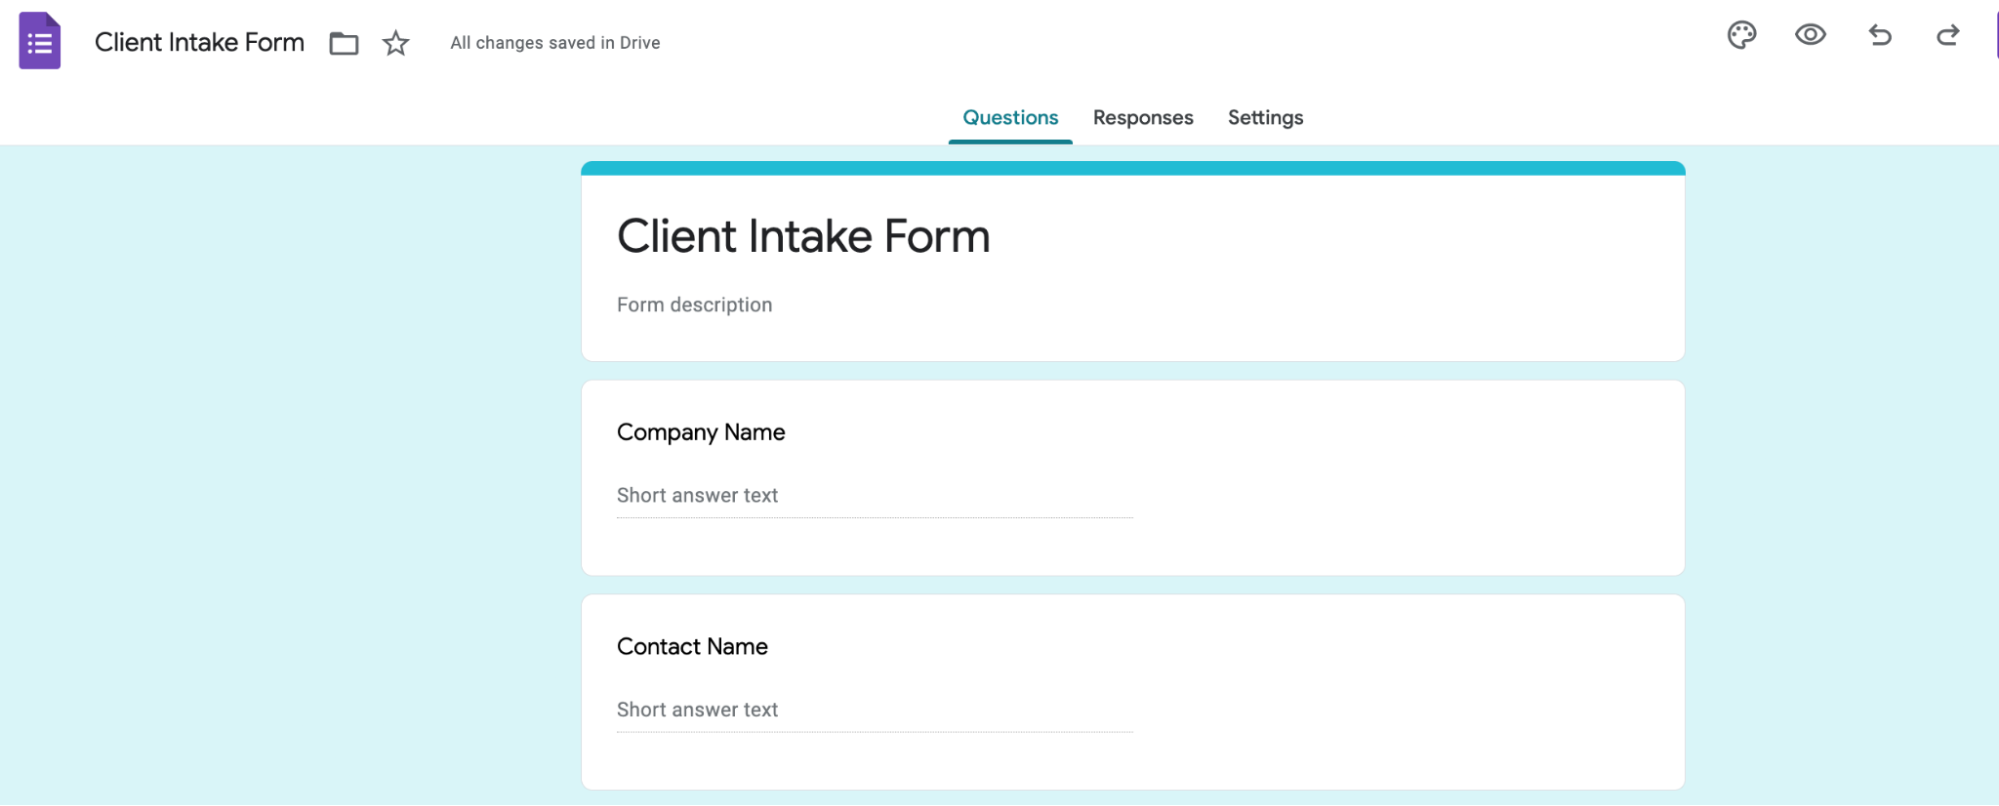 Screenshot of a client intake form on Google Forms.